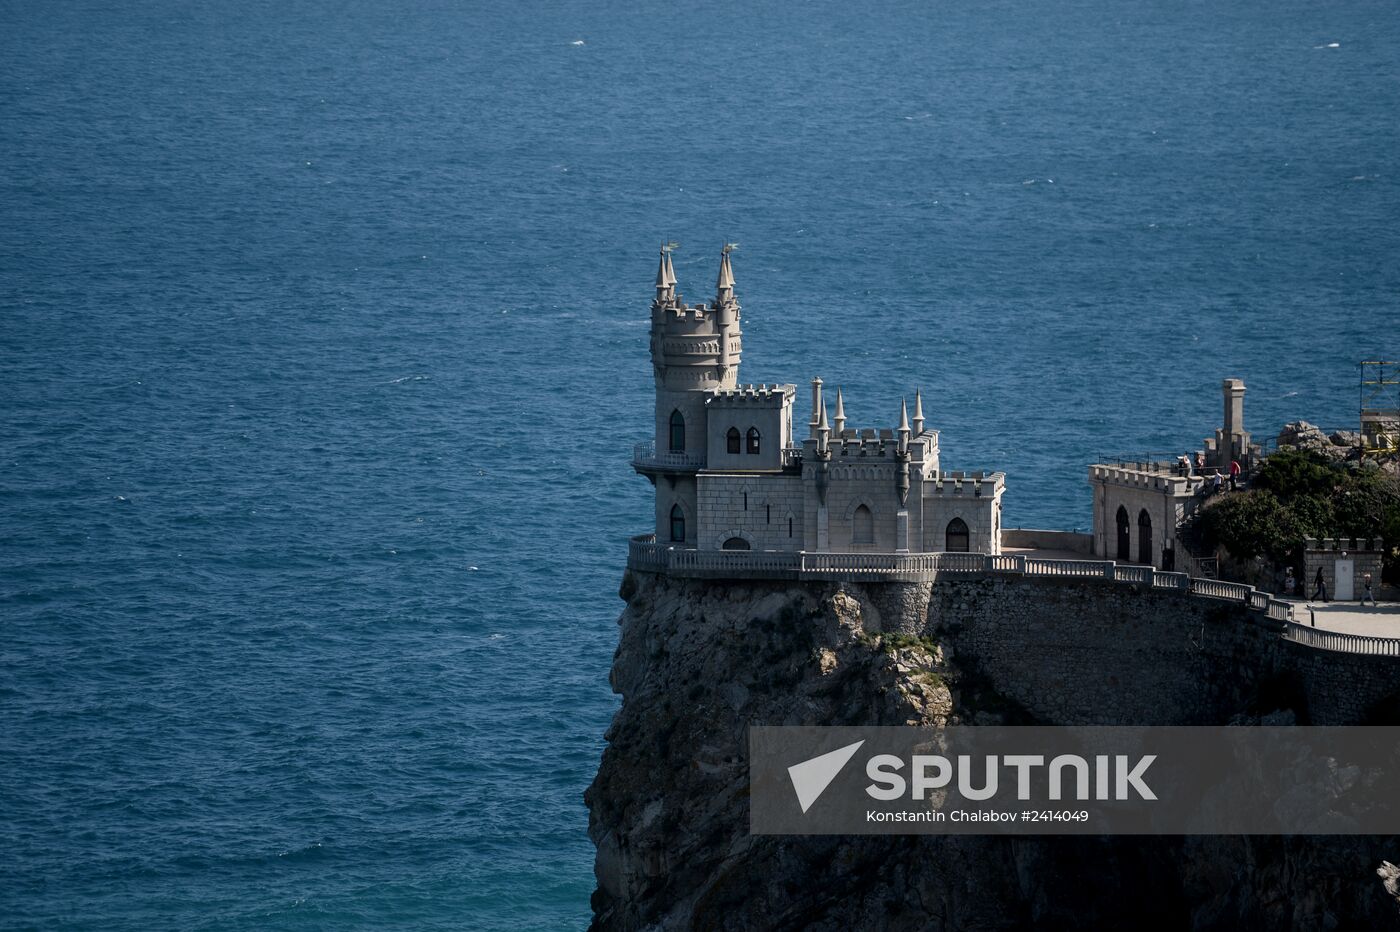 The Swallow's Nest architectural monument